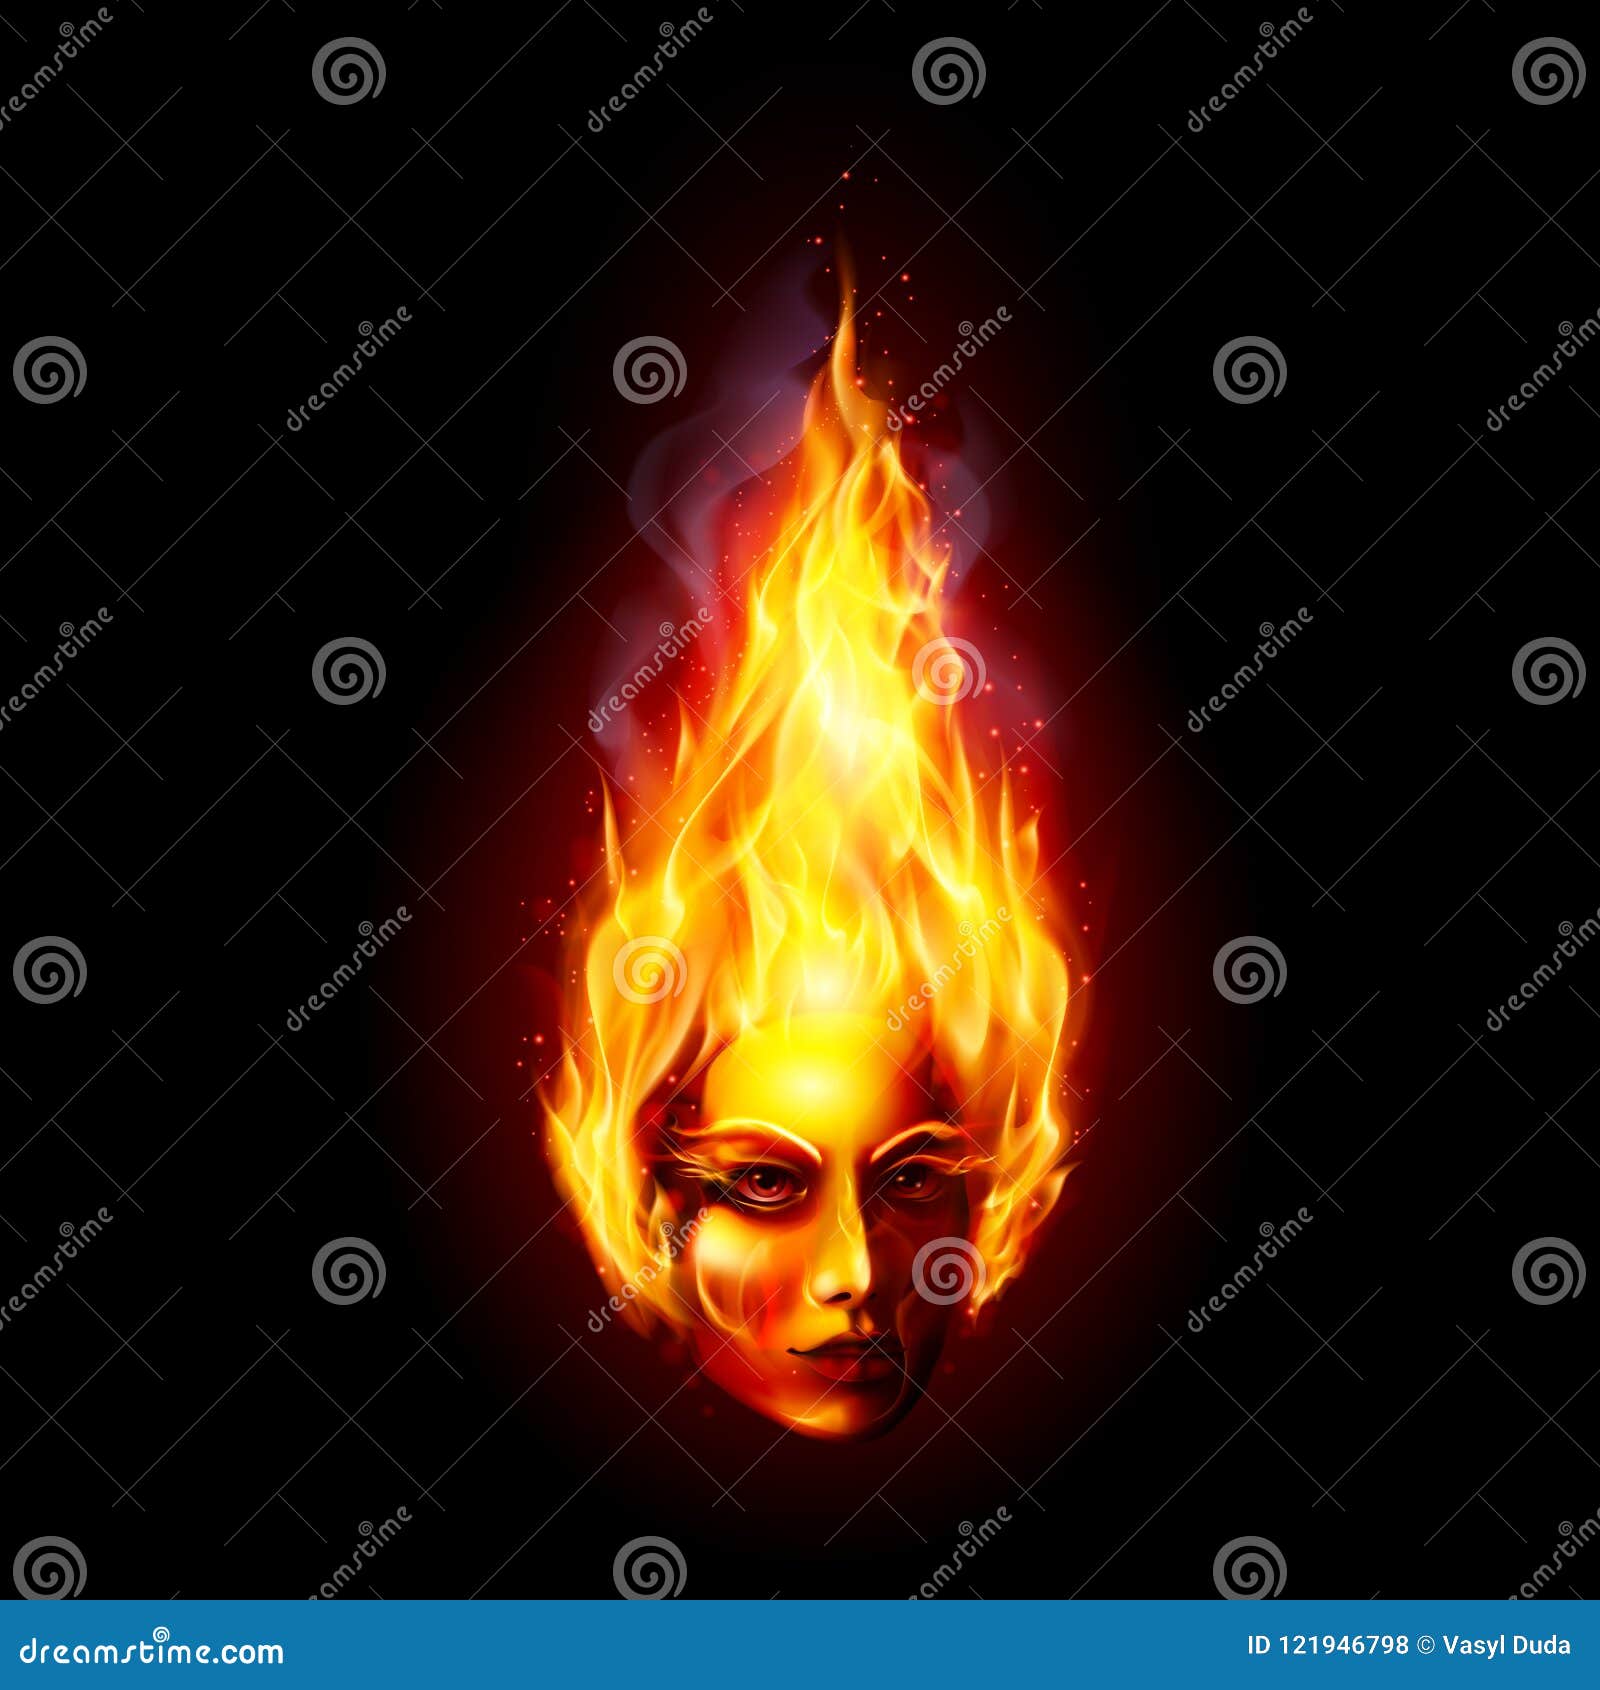 Head in Fire stock vector. Illustration of fire, icon 121946798